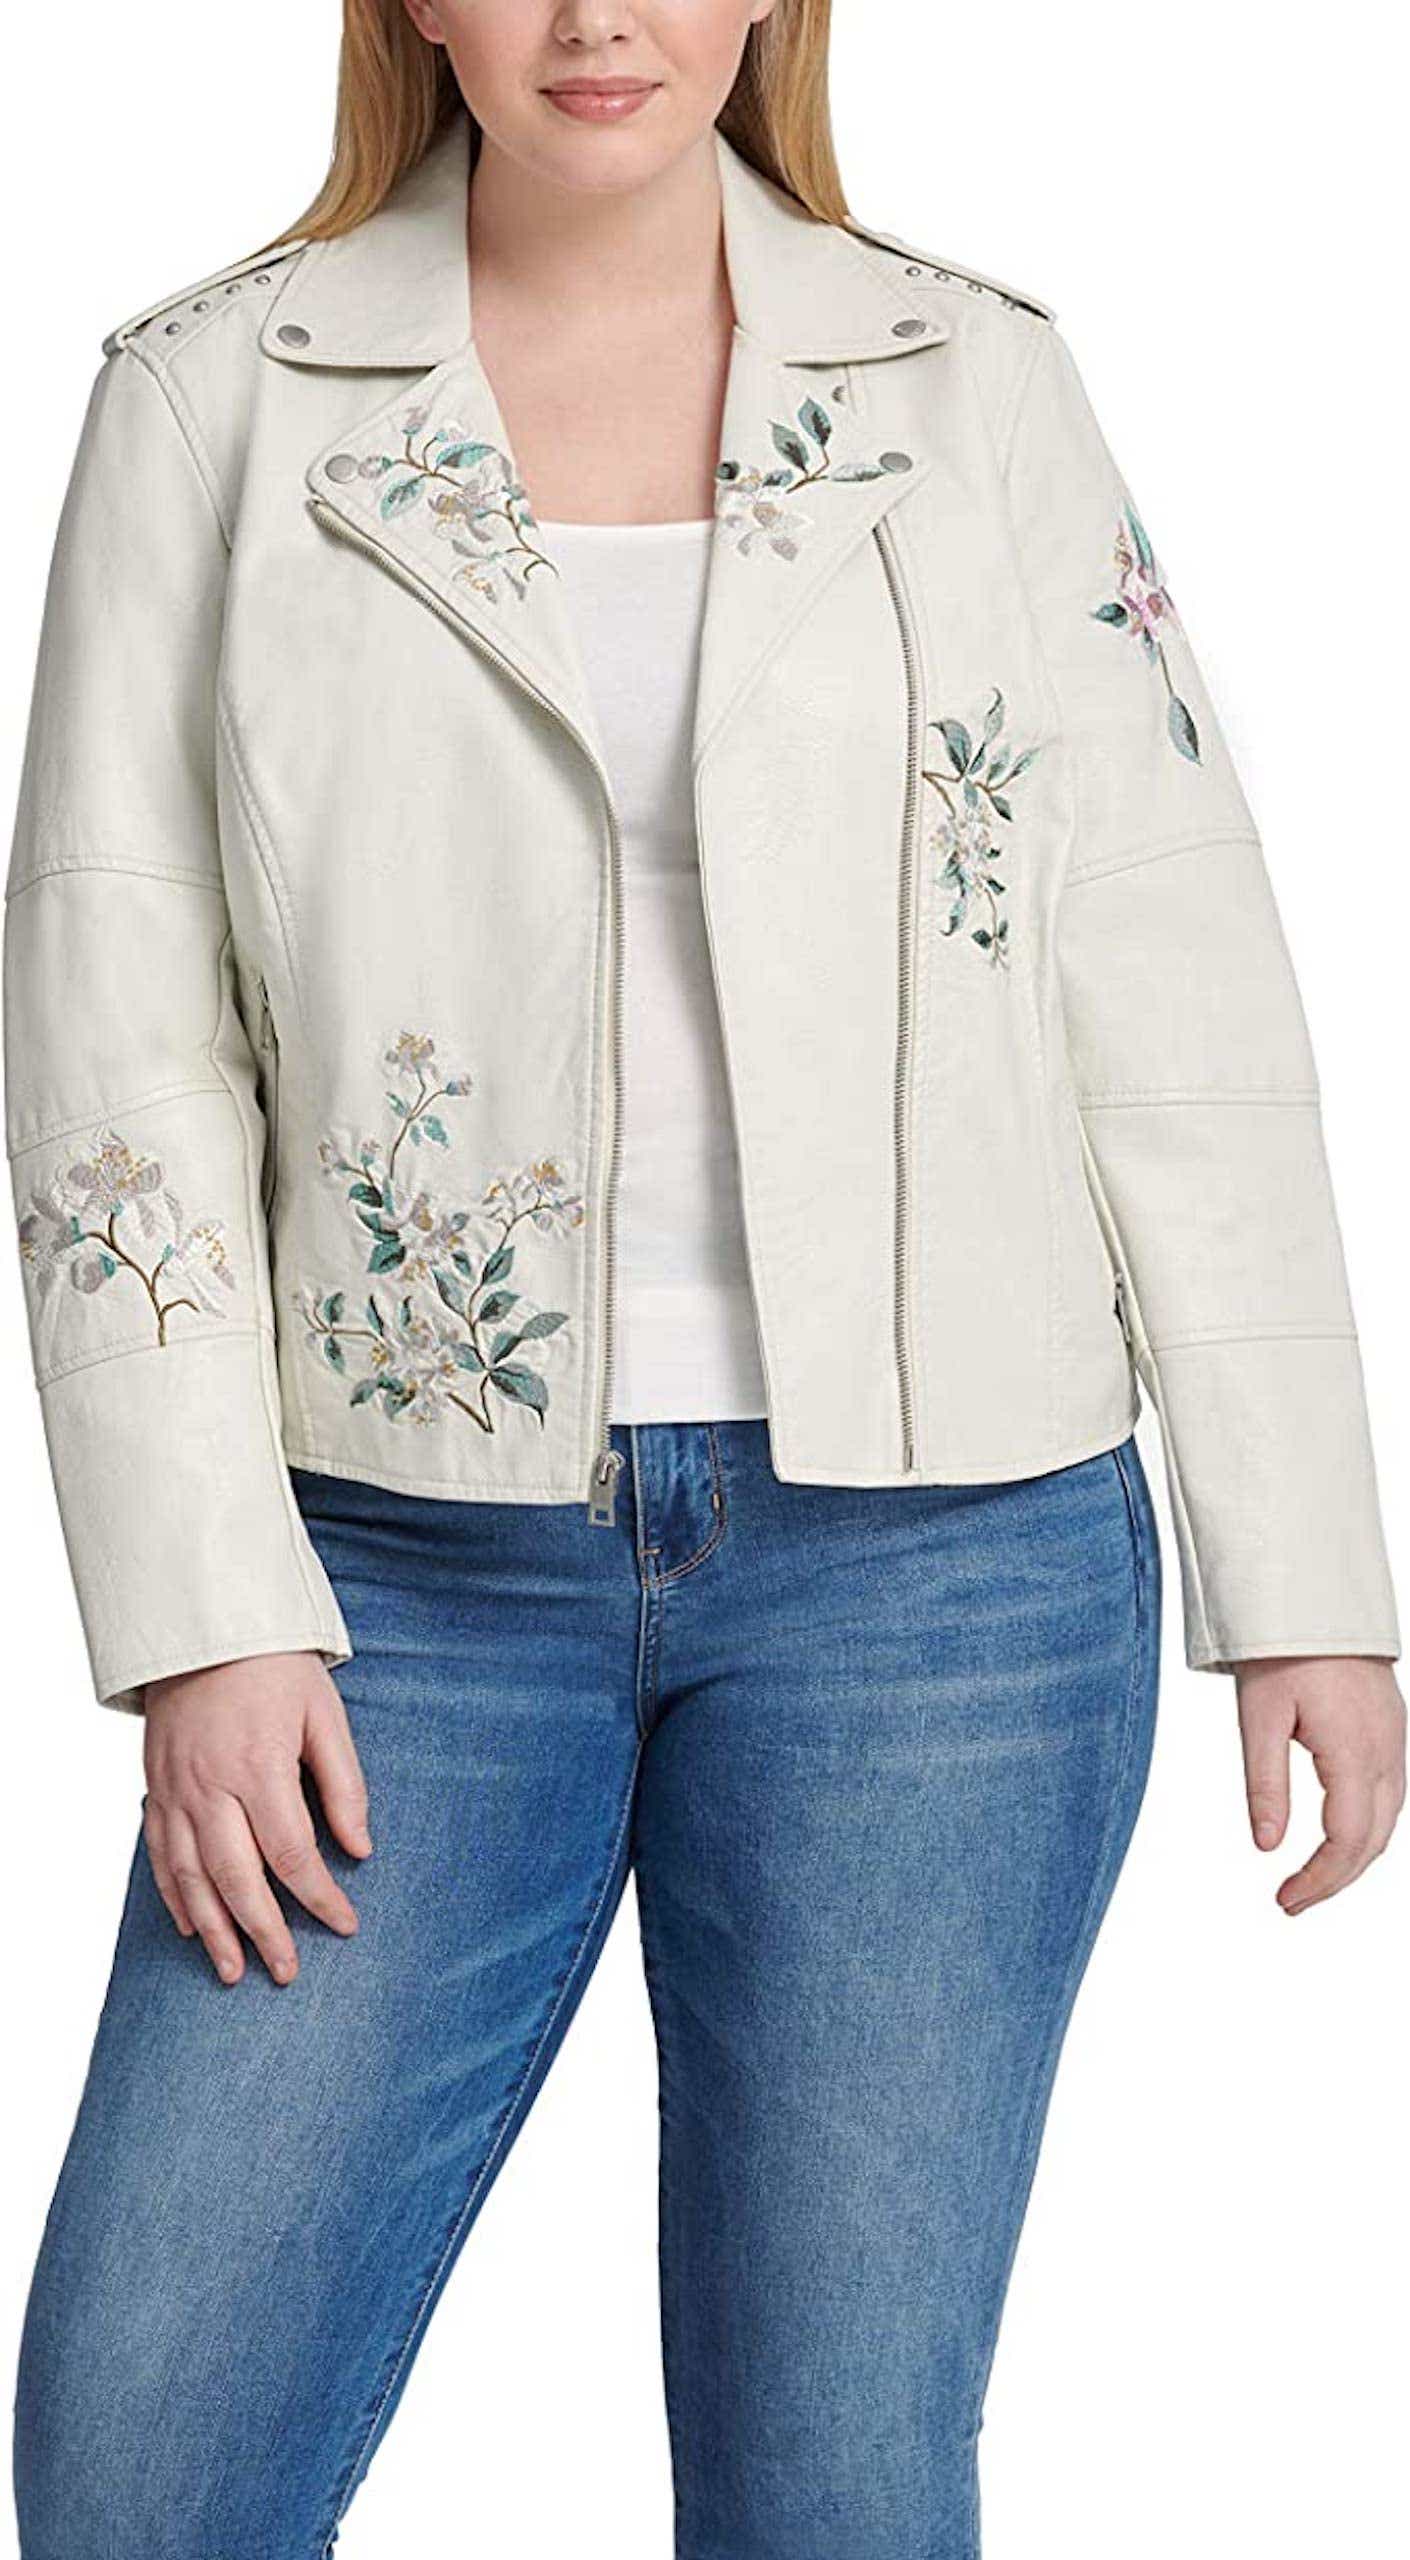 A woman wears a light beige leather jacket covered with white and green floral embroidery.